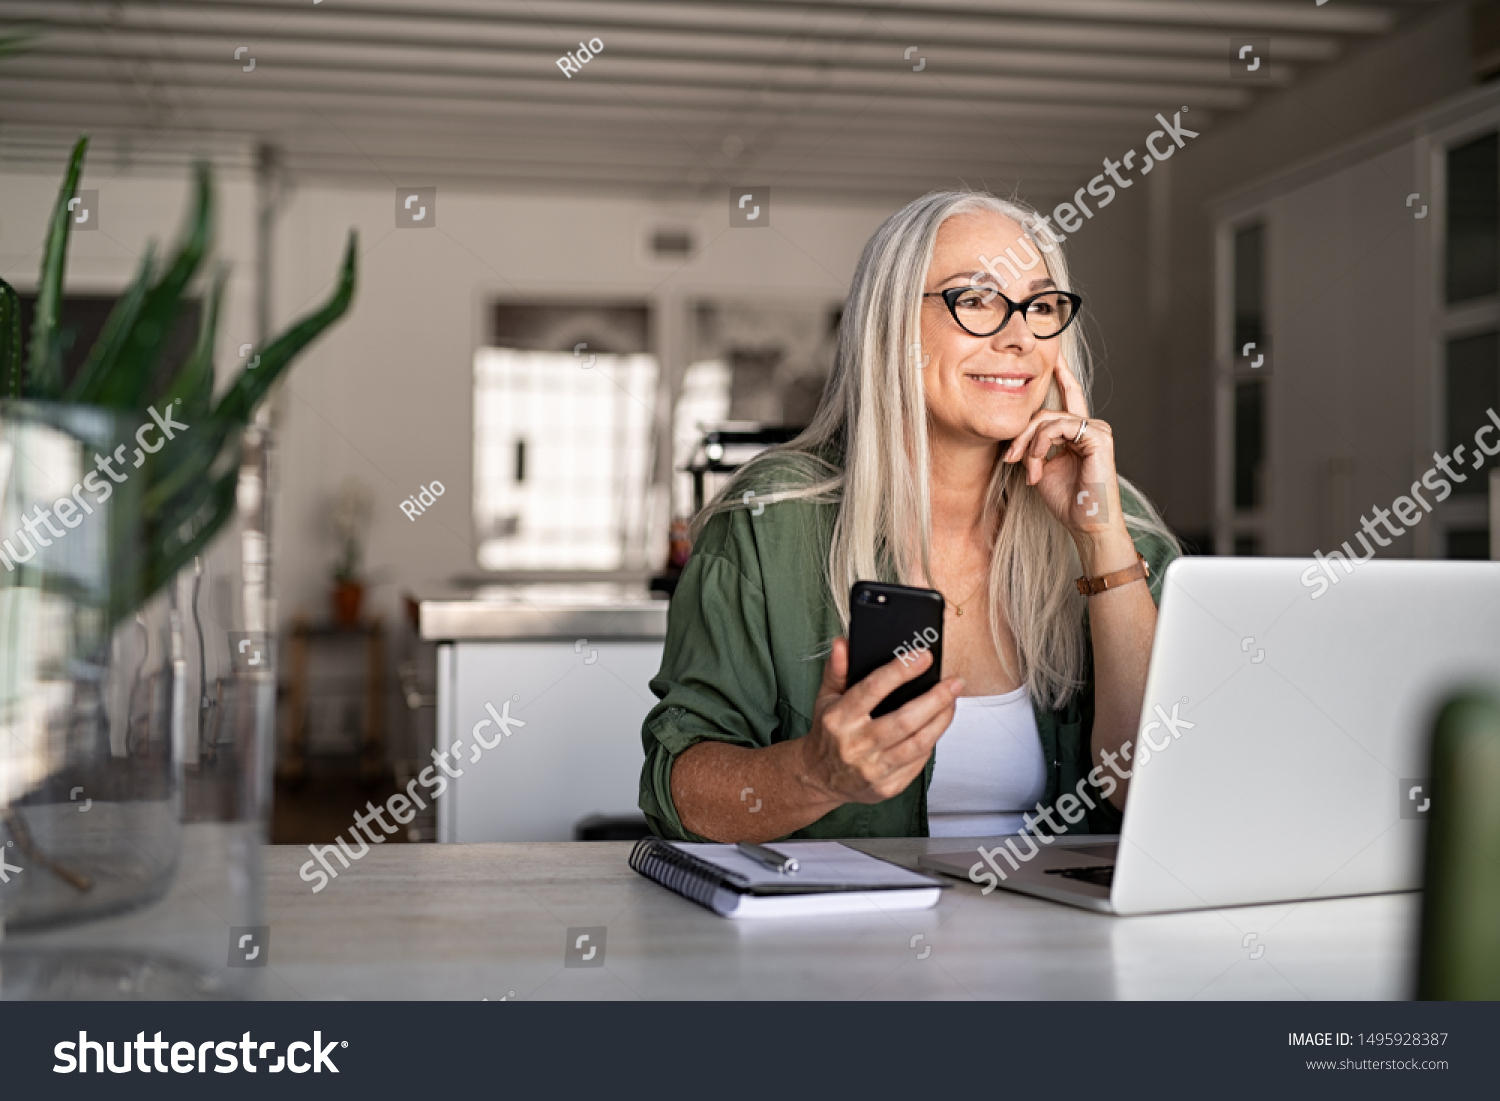 Happy senior woman holding smartphone and laptop daydreaming while looking away. Successful stylish old woman working at home while thinking. Fashionable lady entrepreneur wearing cool eyeglasses. #1495928387